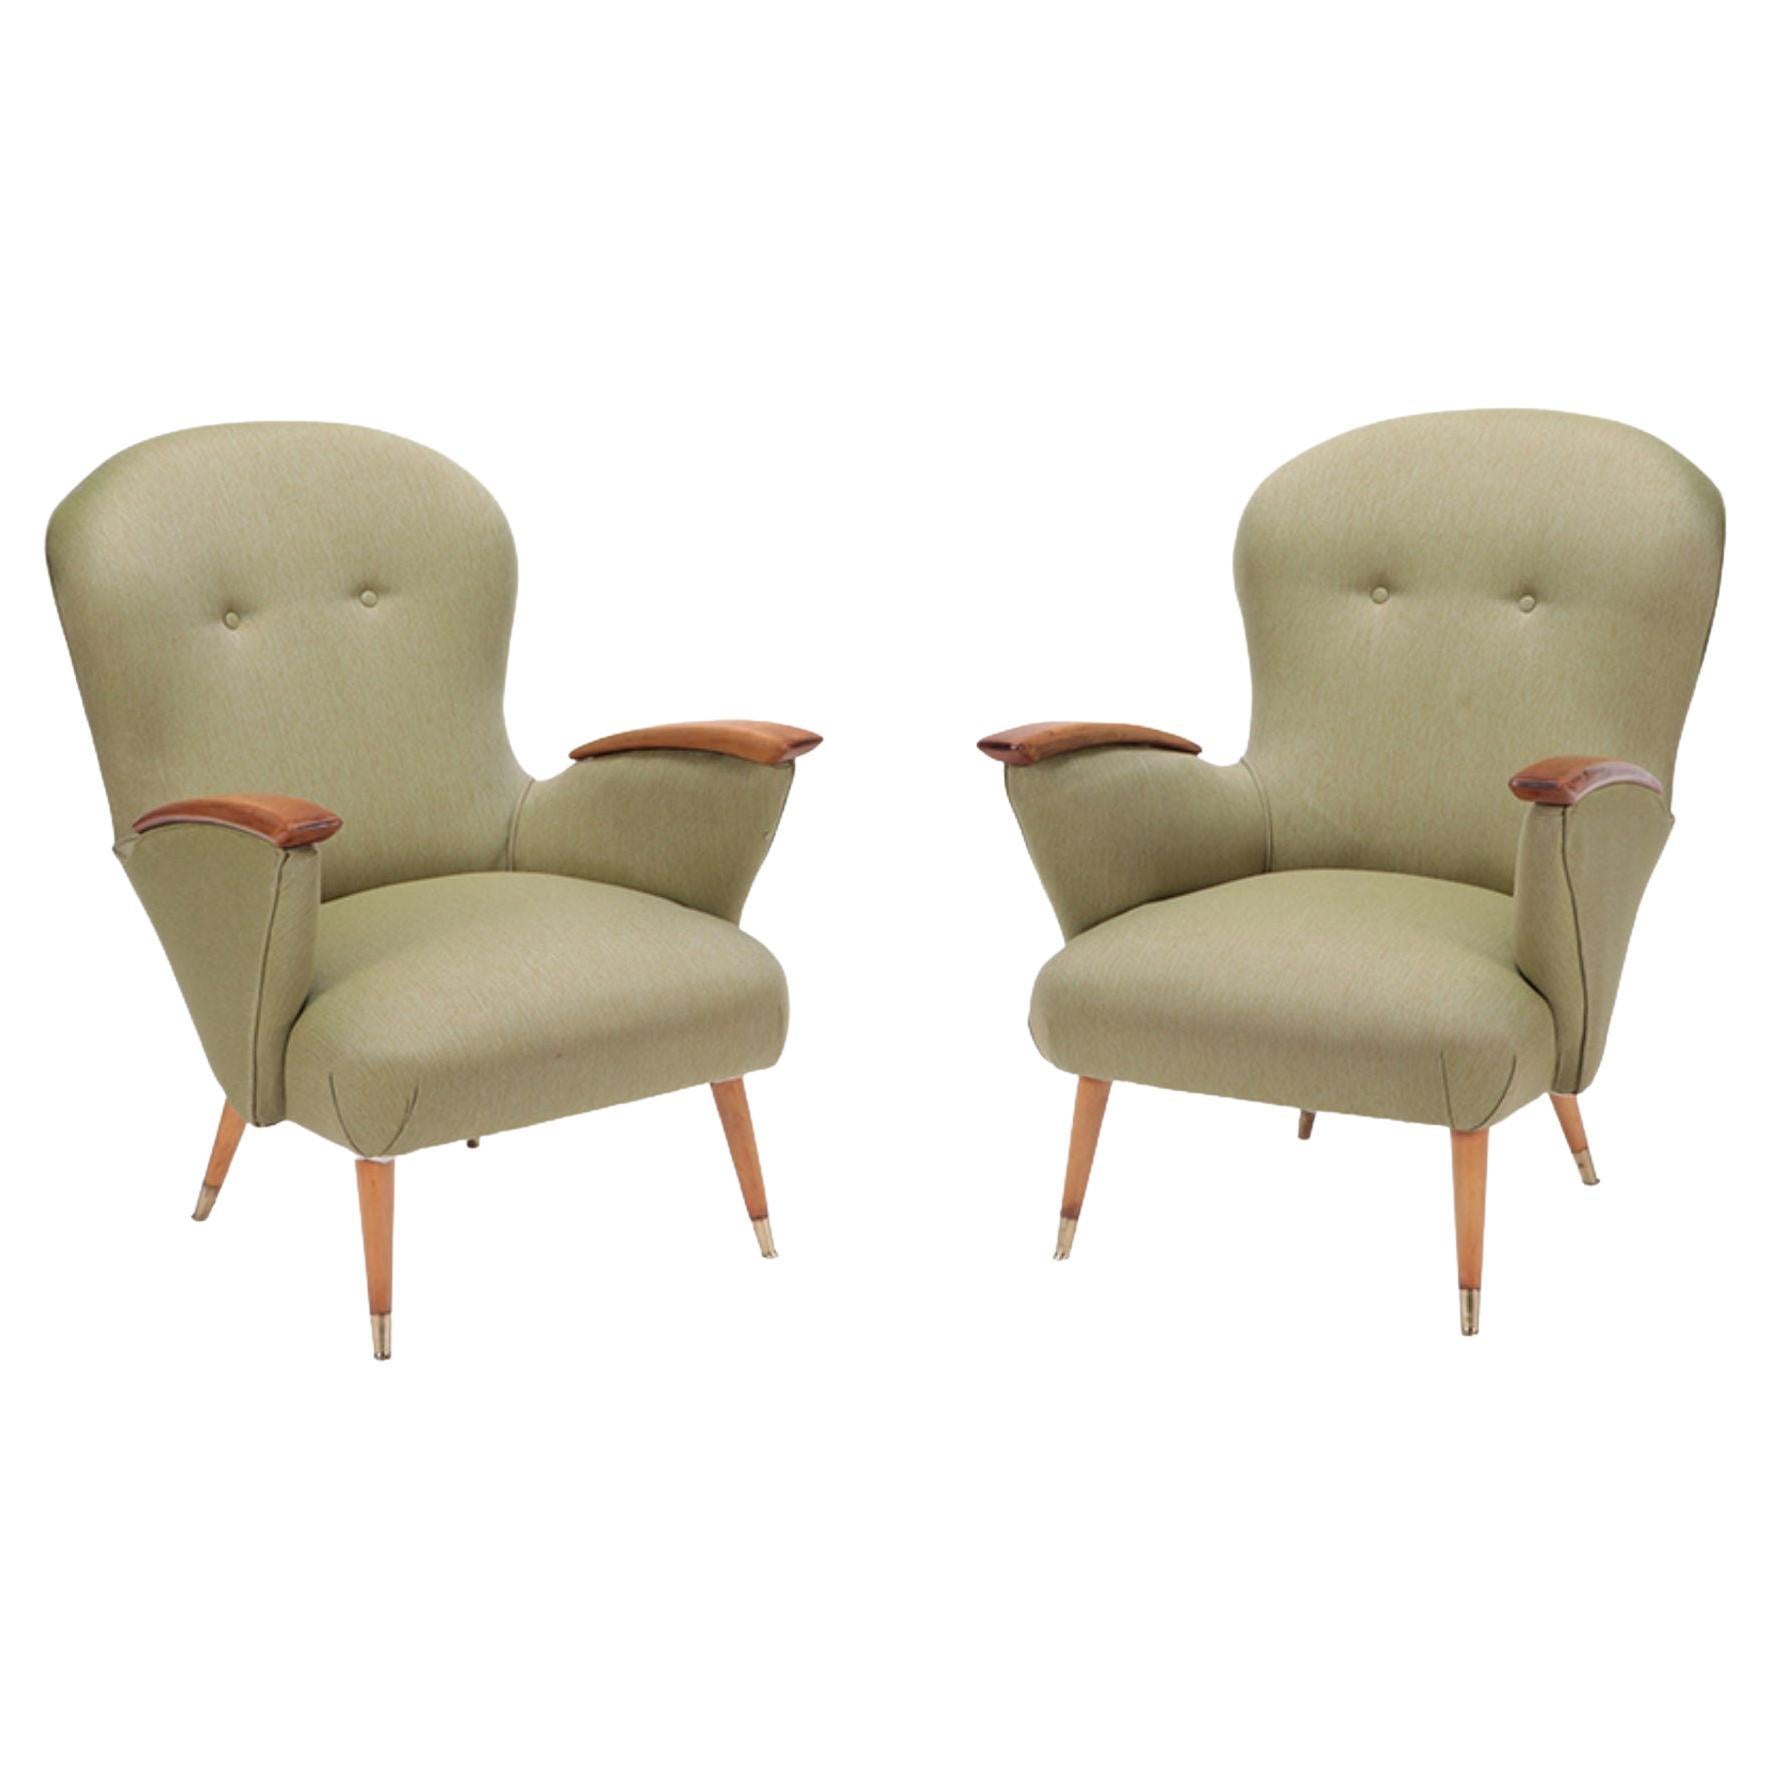 Pair of Restored Danish Armchairs with Rolled Arms, circa 1950